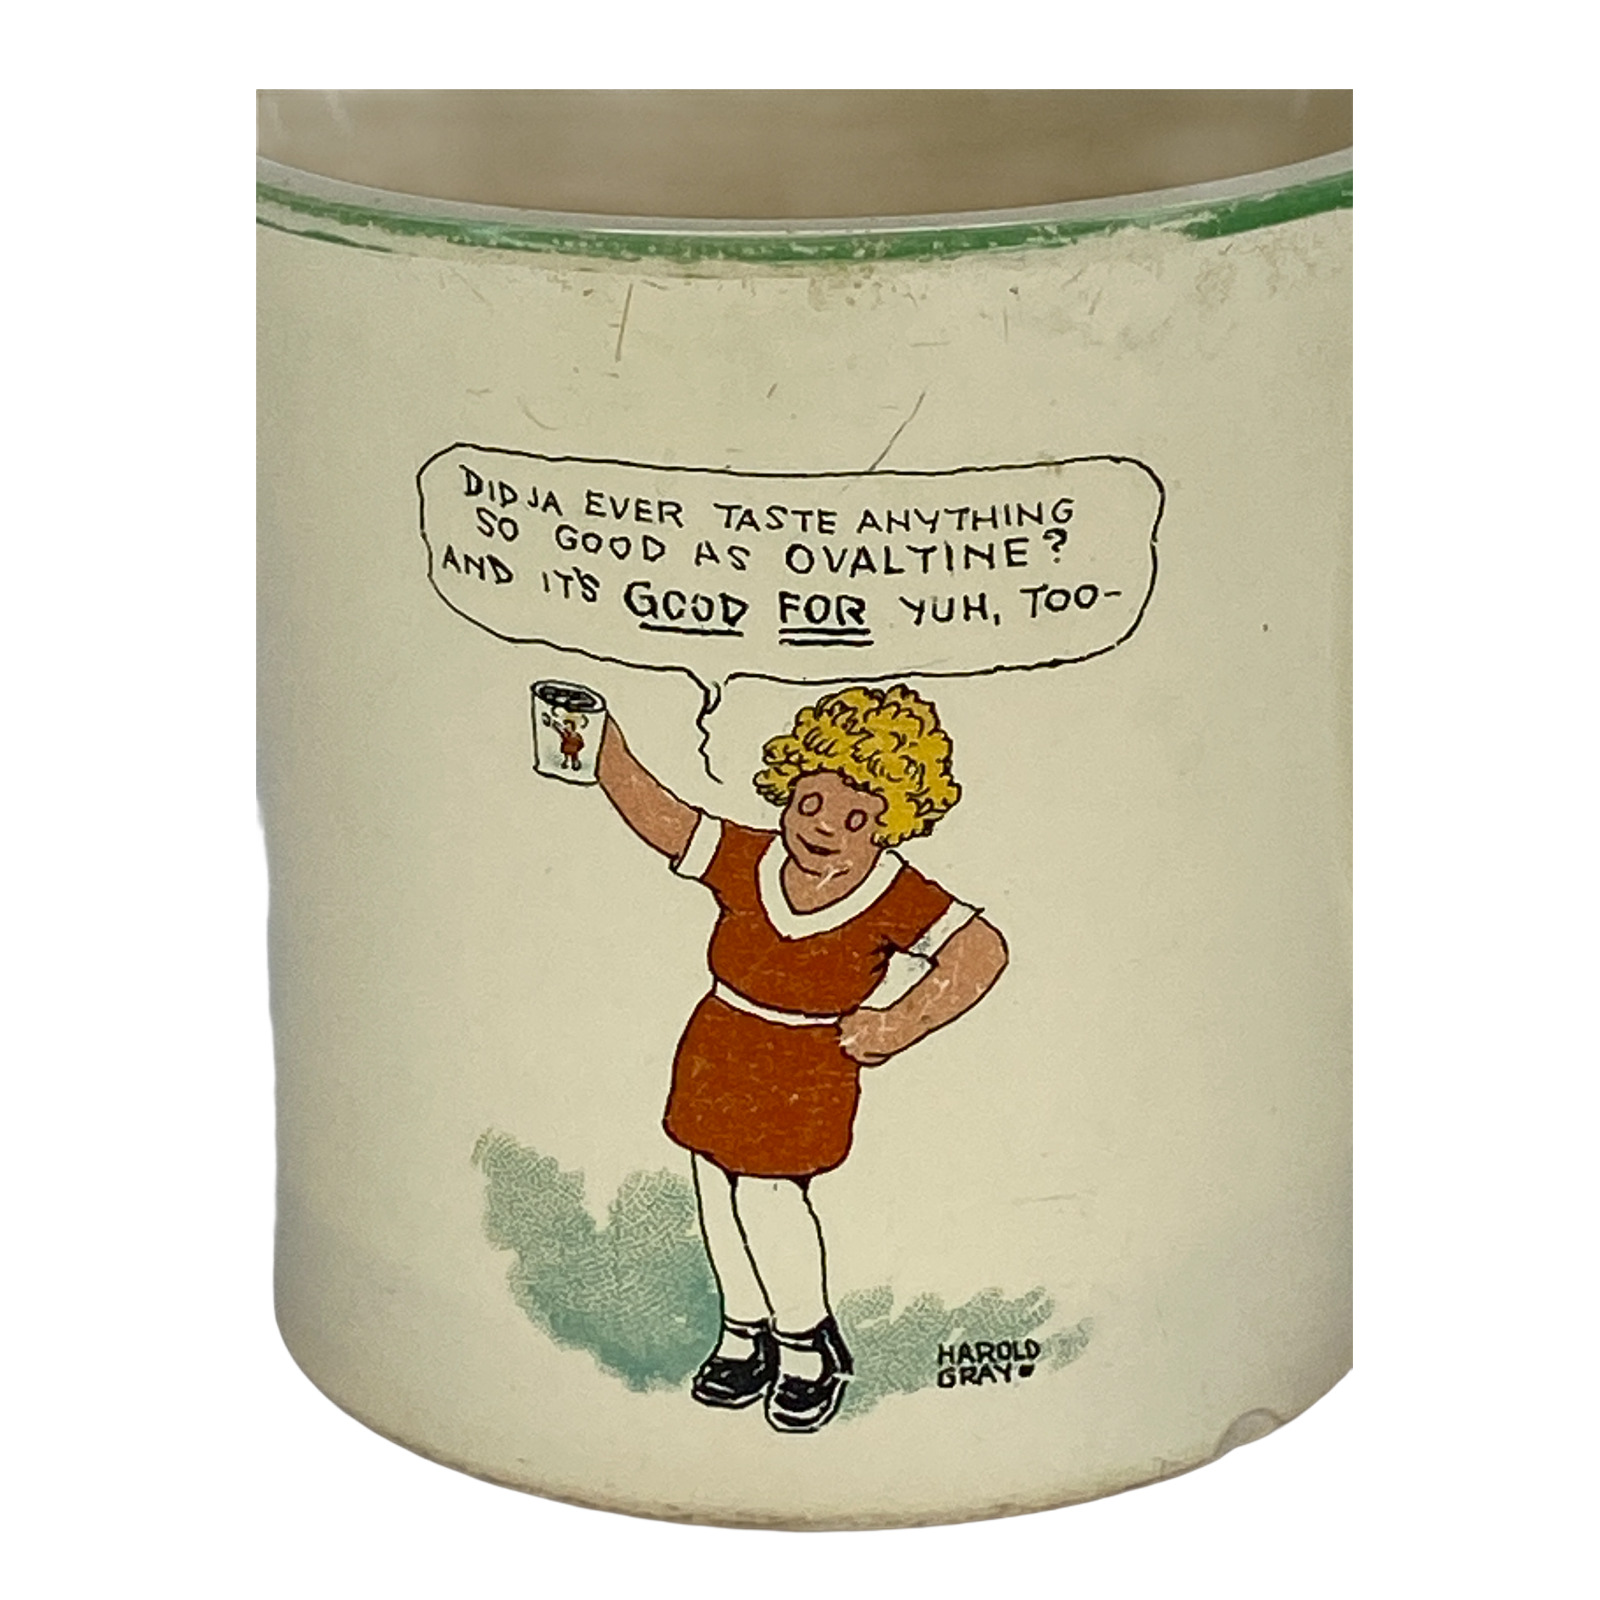 Vintage Little Orphan Annie Mug and Sandy 1930 to 1940 by Ovaltine